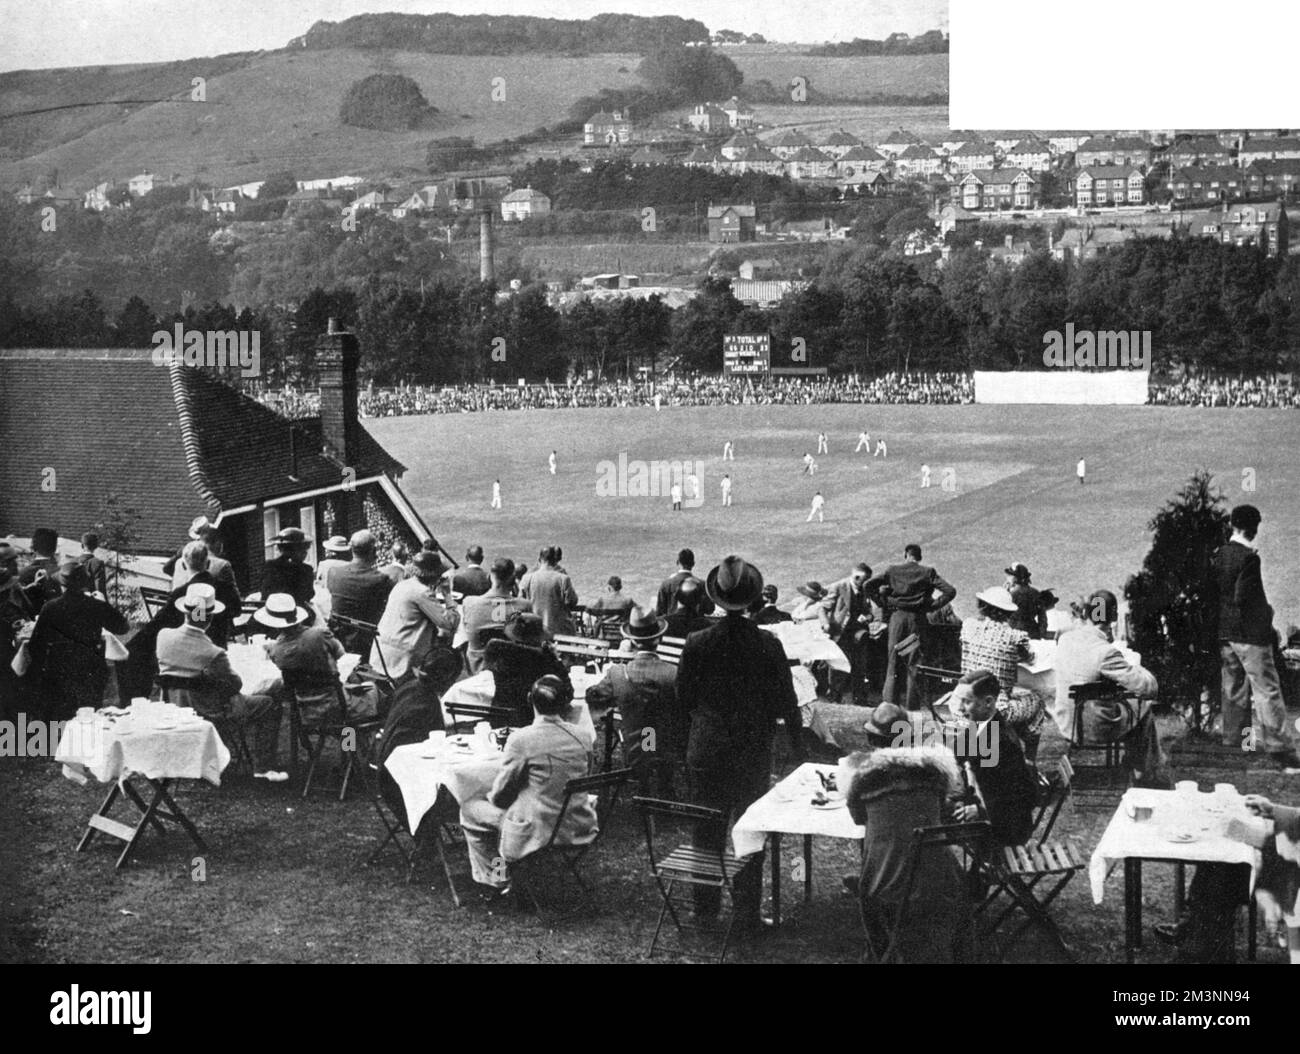 The lovely Crabble cricket ground at Dover, Kent, which was used by Kent County Cricket Club from 1907 to 1976. The match in progress is between Kent and Yorkshire, which was won easily by the visitors who went on to win the County Championship that season. Stock Photo